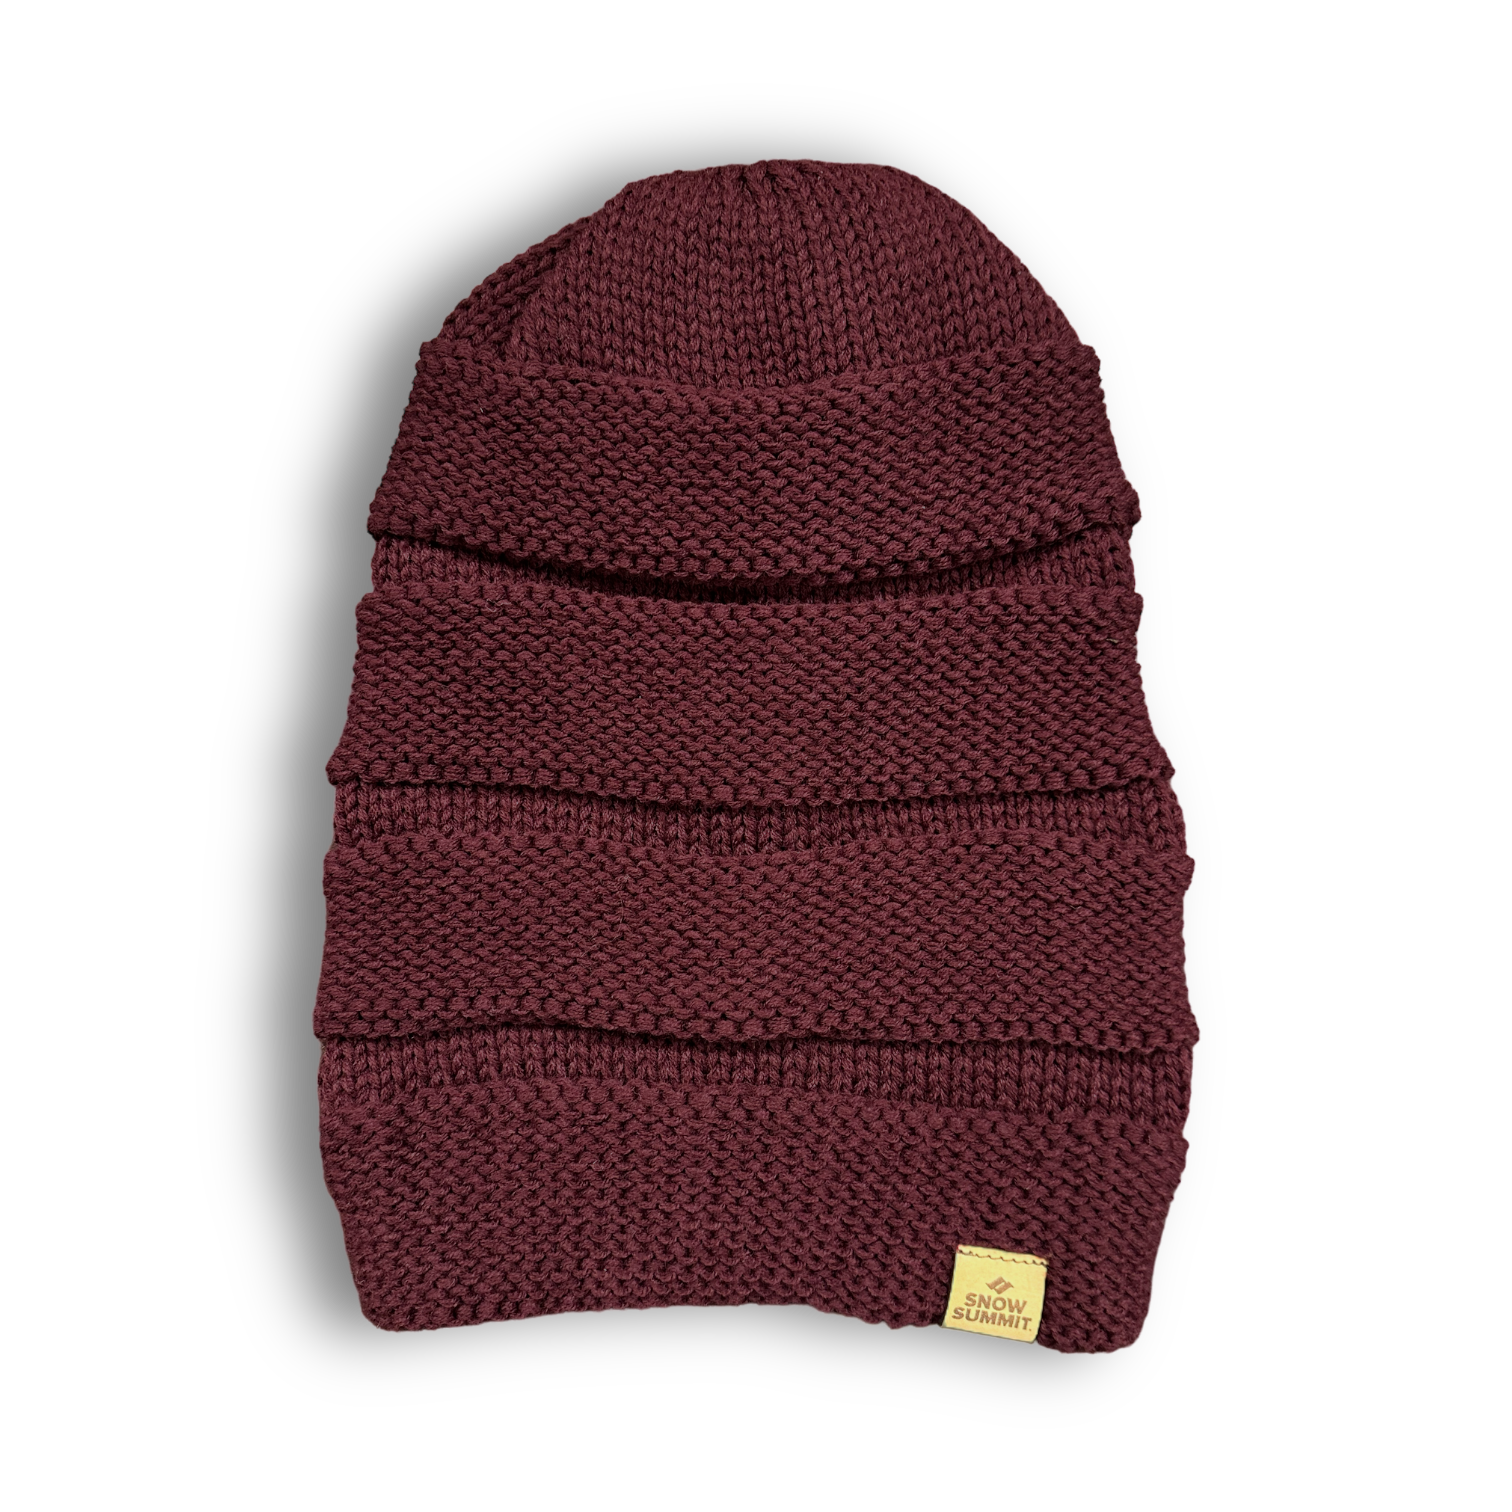 snow summit slouch beanie in burgandy color with logo on bottom left corner